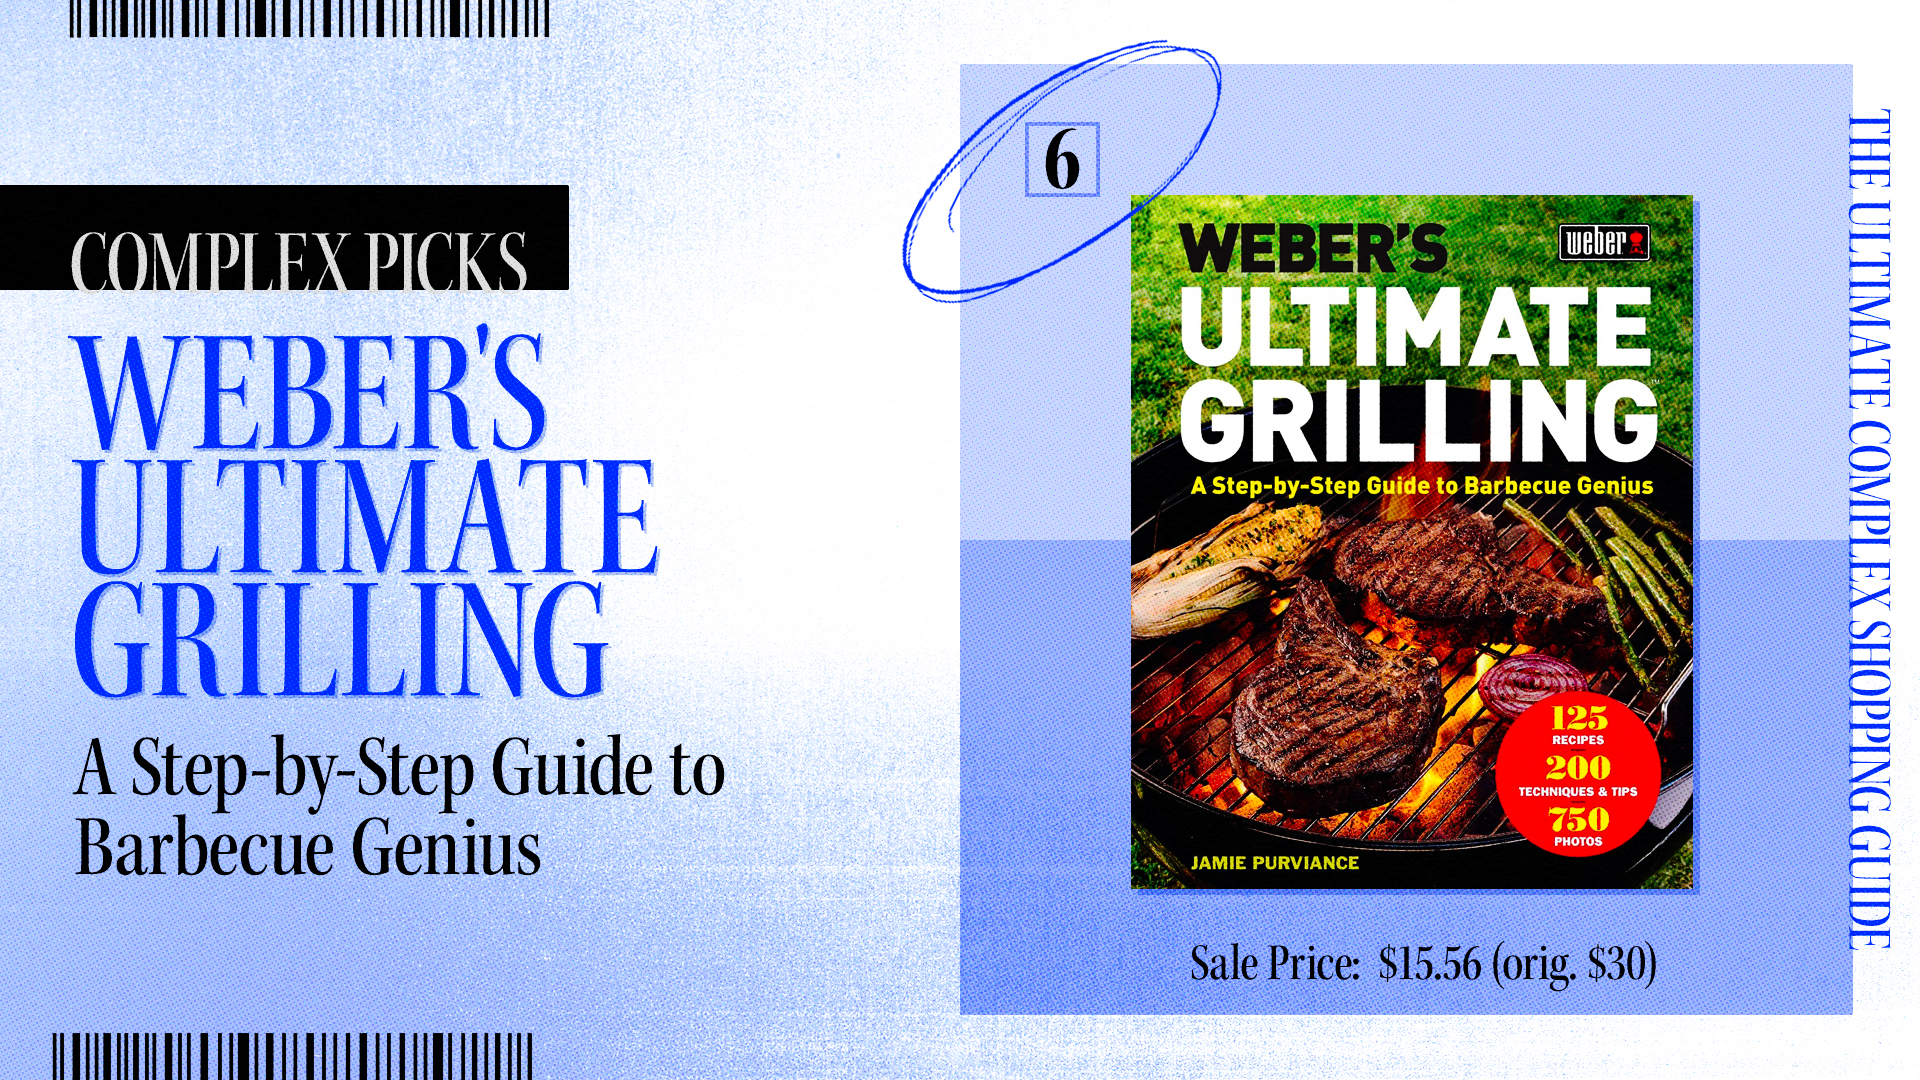 Weber&#x27;s Ultimate Grilling book by Jamie Purviance is showcased on the Ultimate Complex Shopping Guide, originally priced at $30, now $15.56